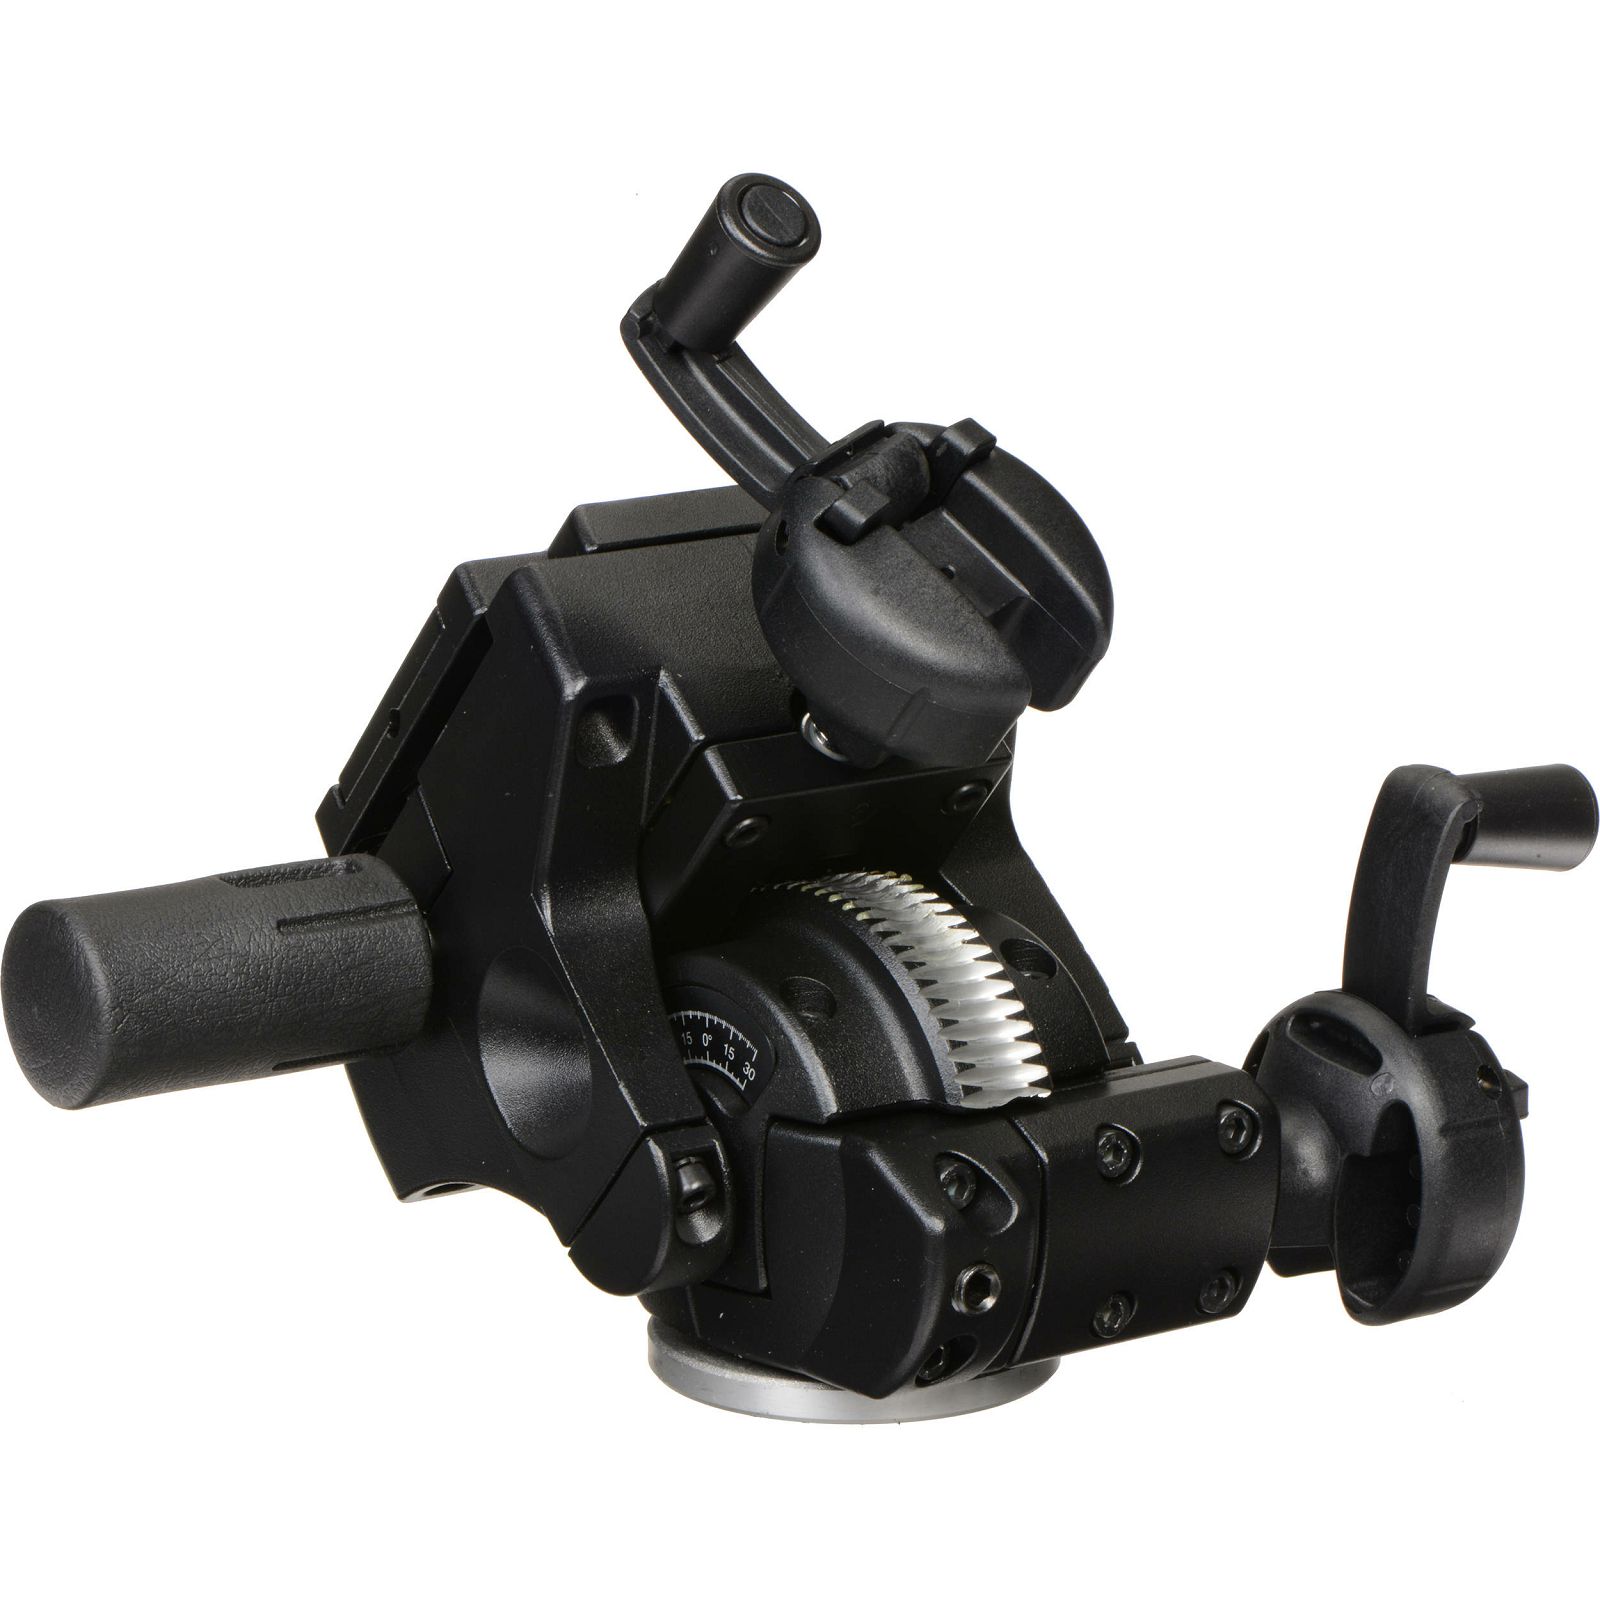 Manfrotto 400 3-Way Geared Pan-and-Tilt Head